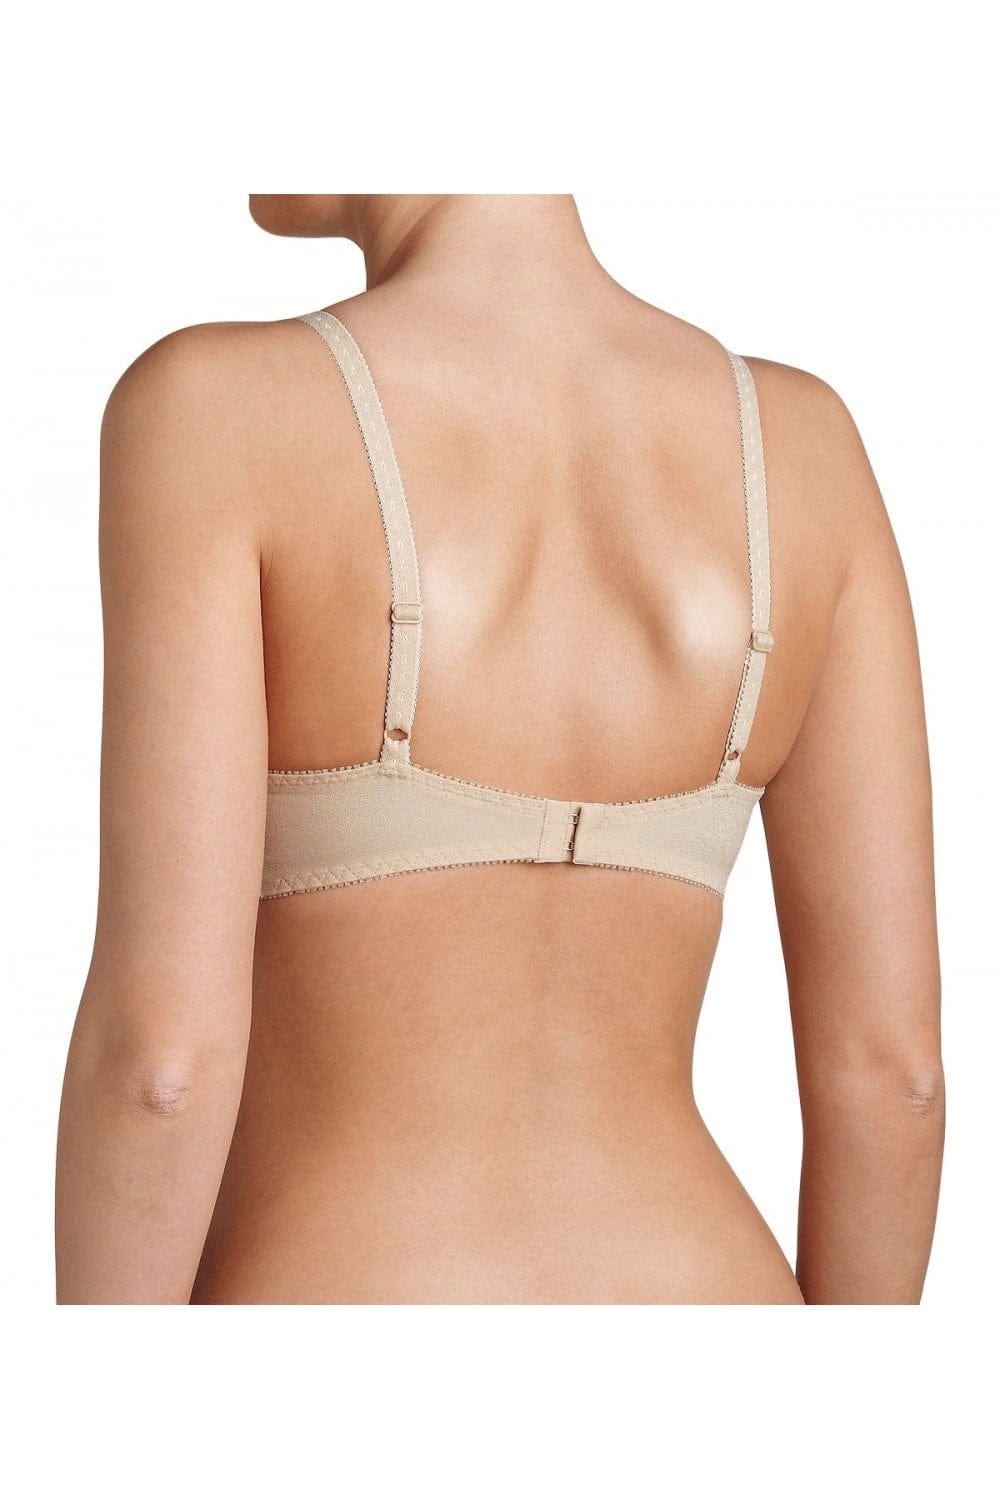 Triumph Amourette 300W Wired Lace Bra - Skin – Potters of Buxton